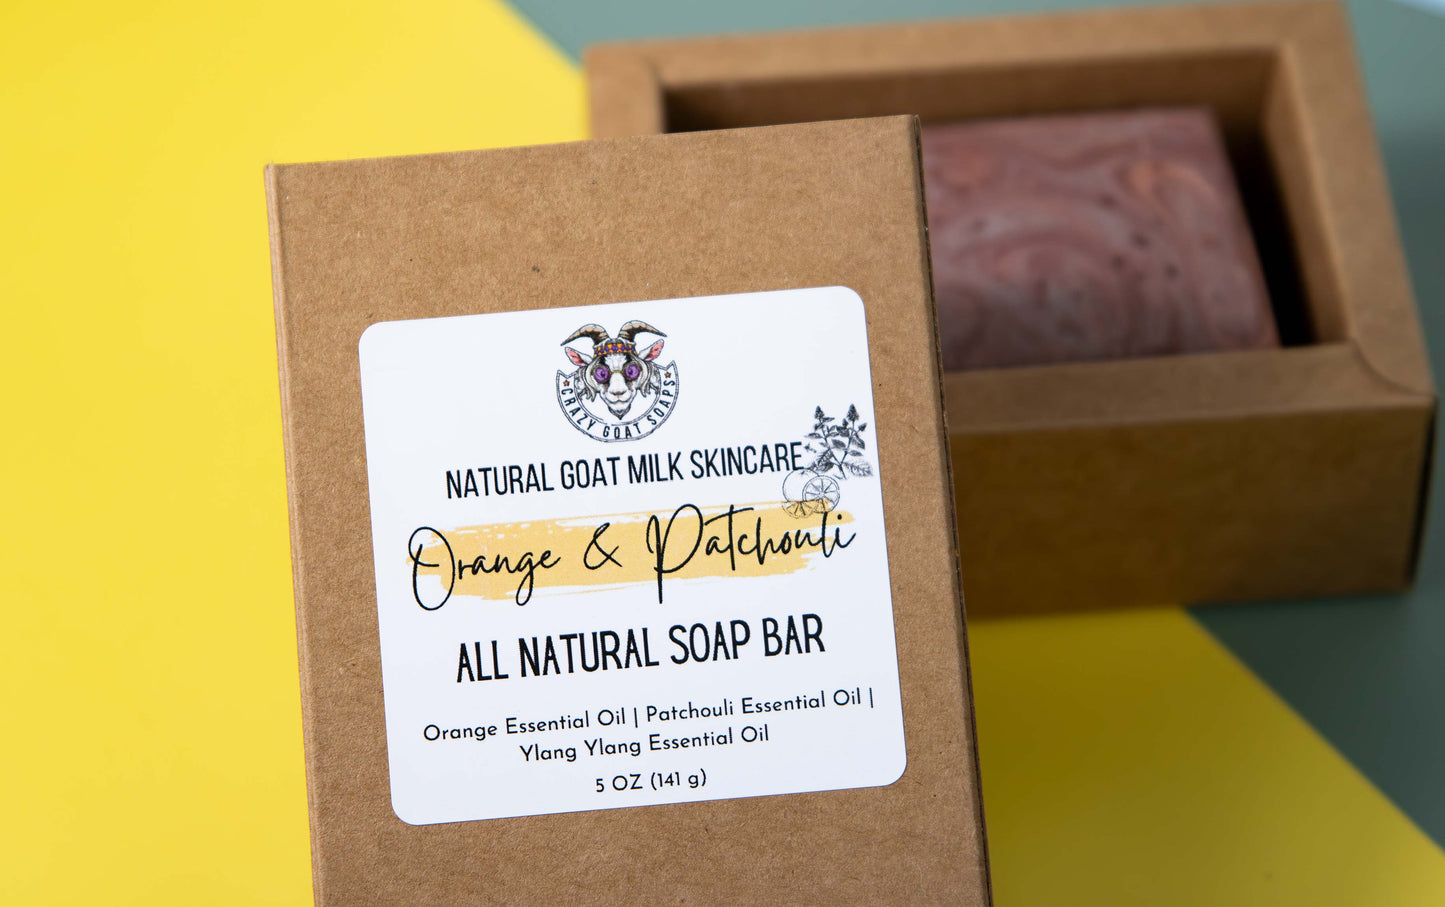 Crazy Goat Soaps patchouli and orange essential goat milk soap bar comes fully packaged and labeled.